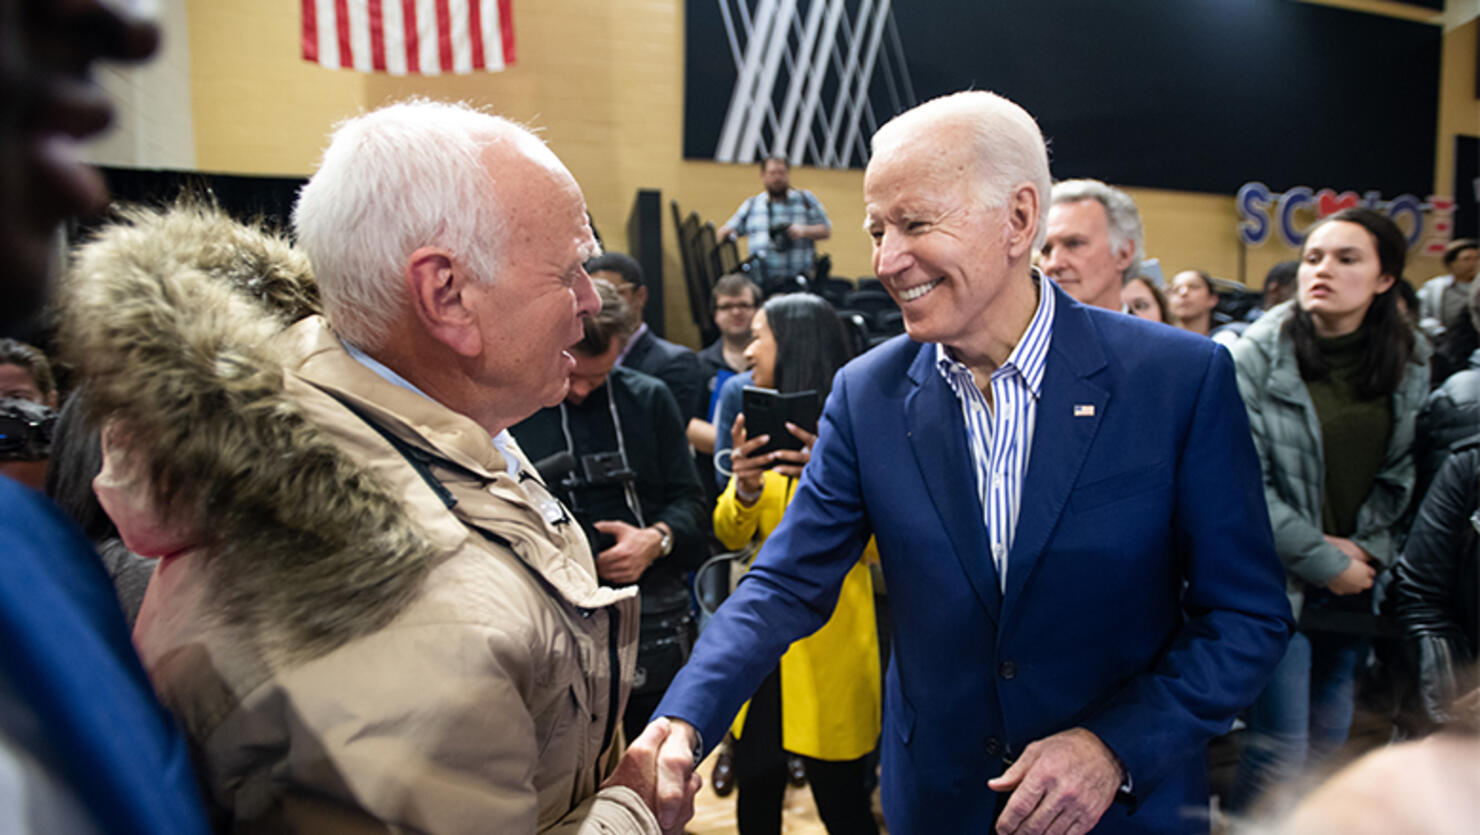 Presidential Candidate Joe Biden Campaigns Ahead Of Primary In South Carolina